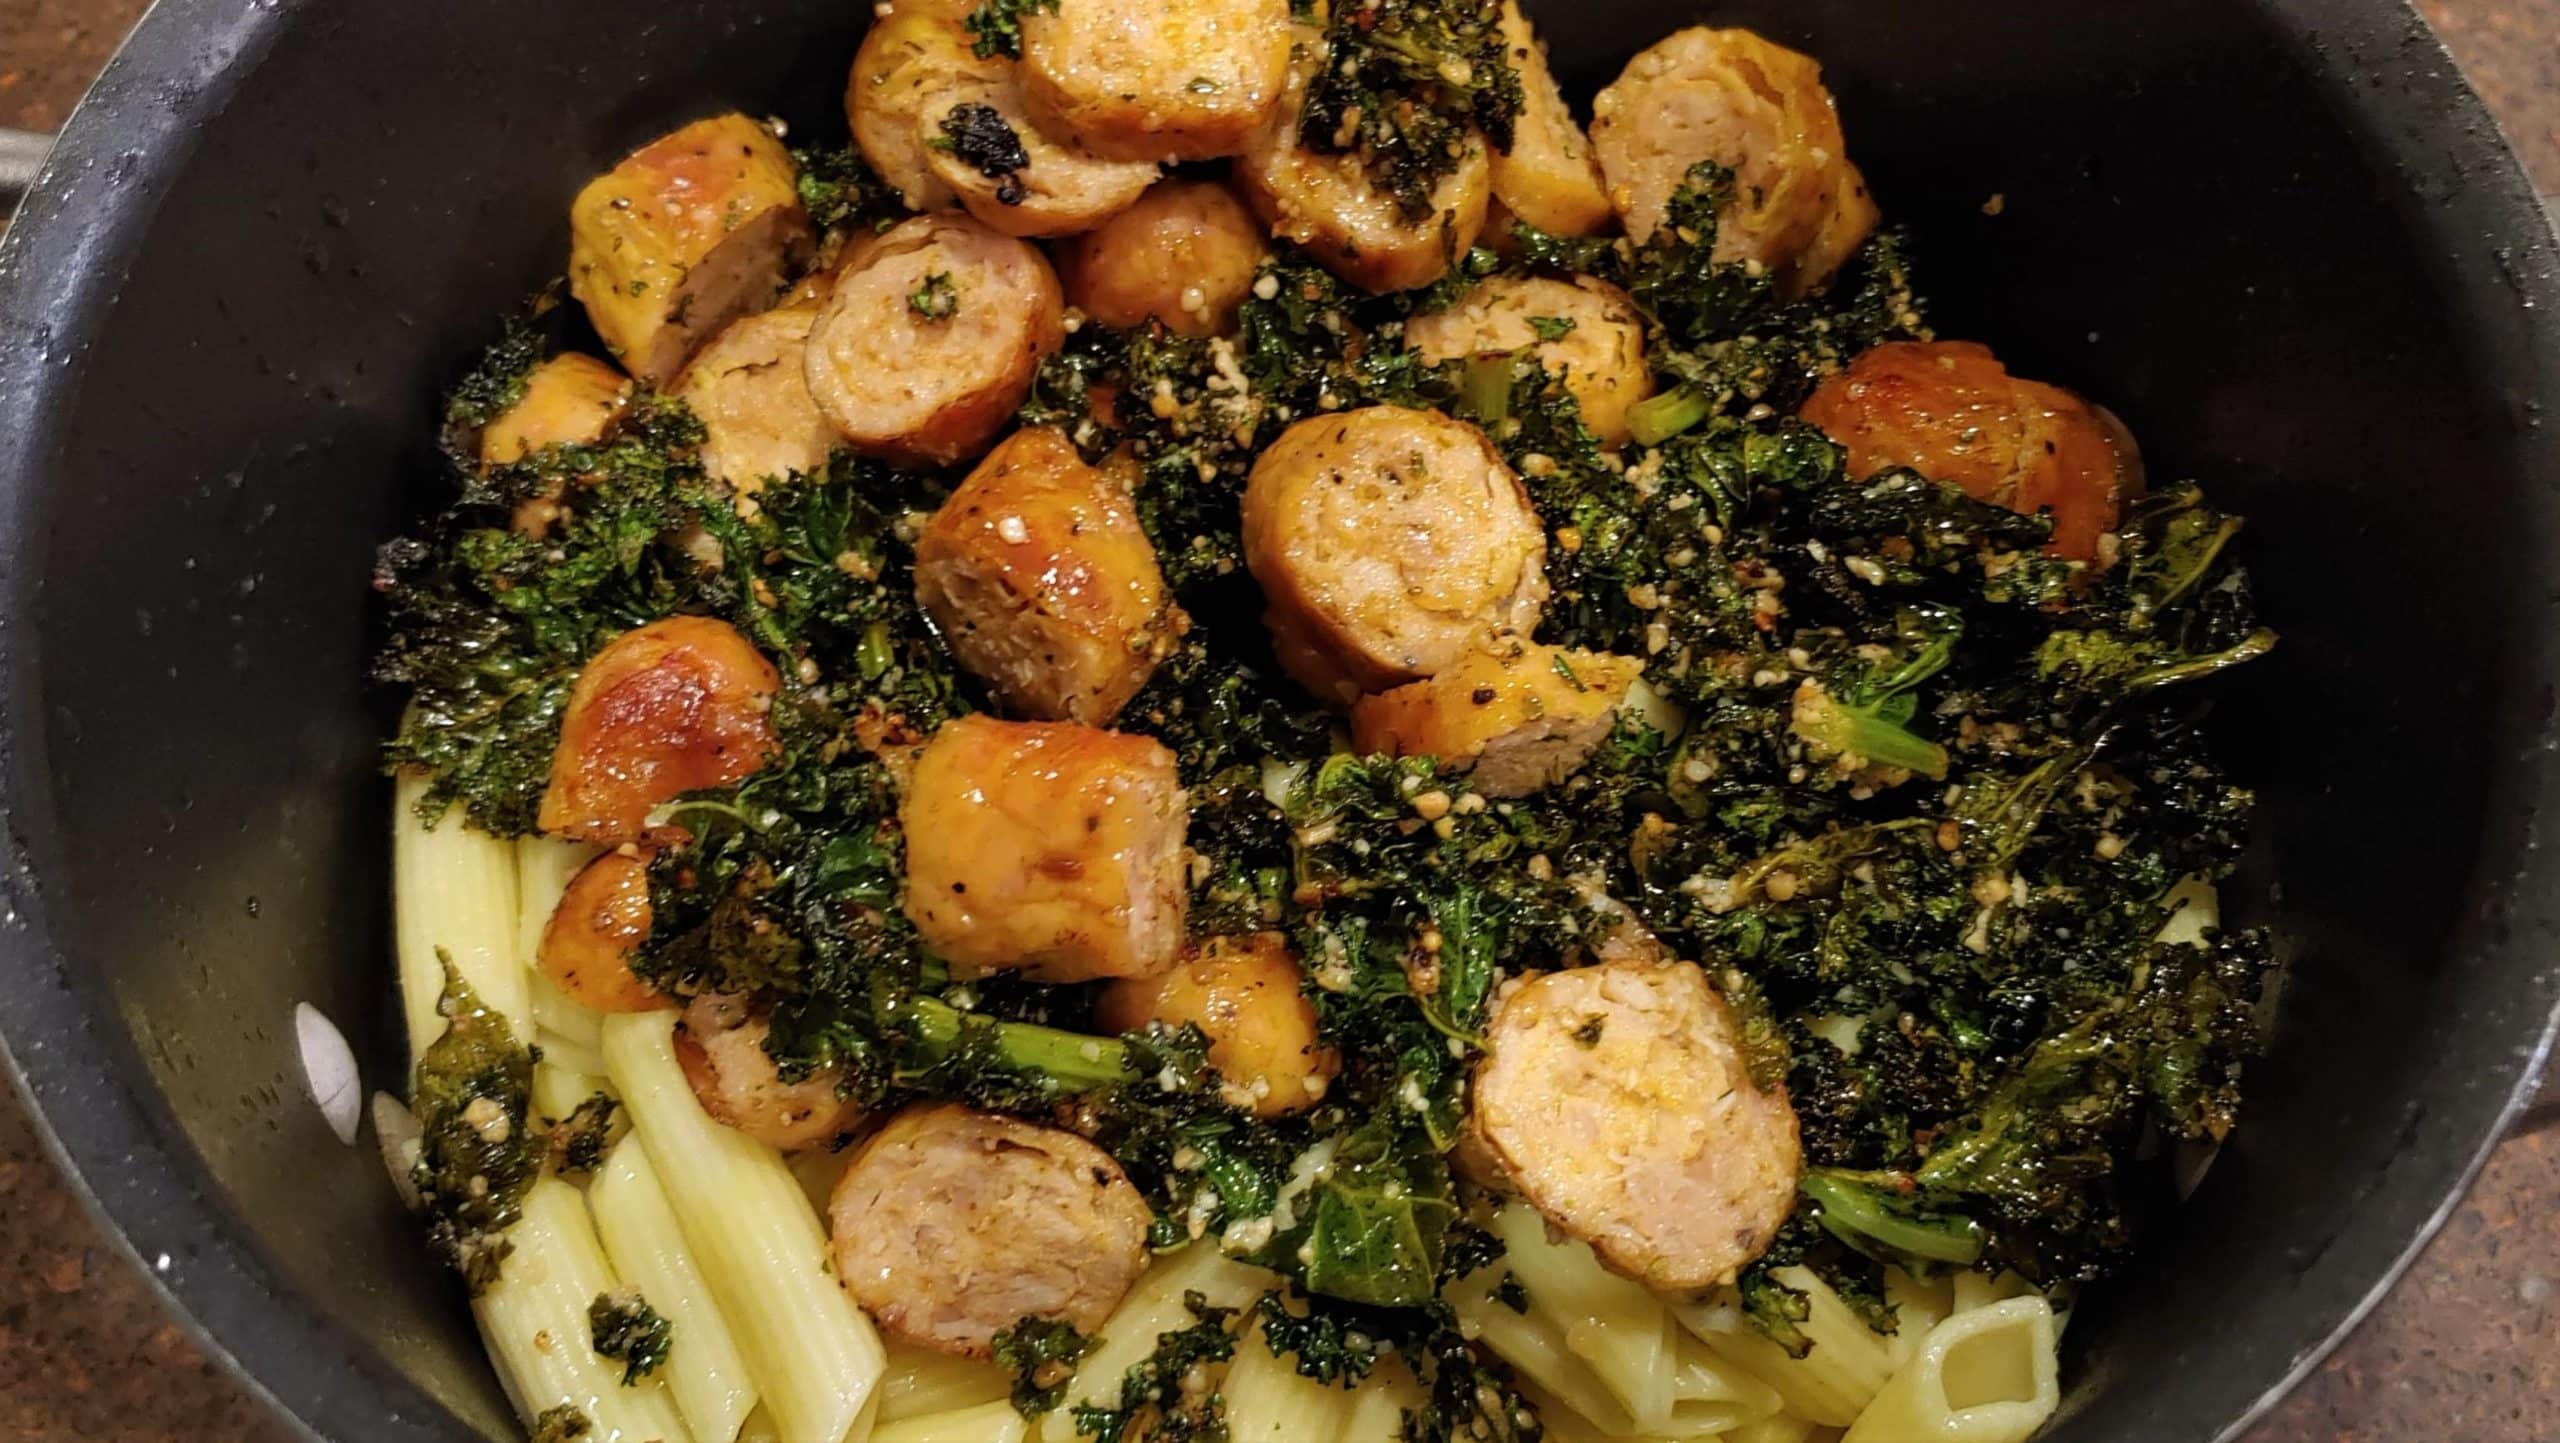 Chicken Sausage Kale pasta ingredients - Dining in with Danielle